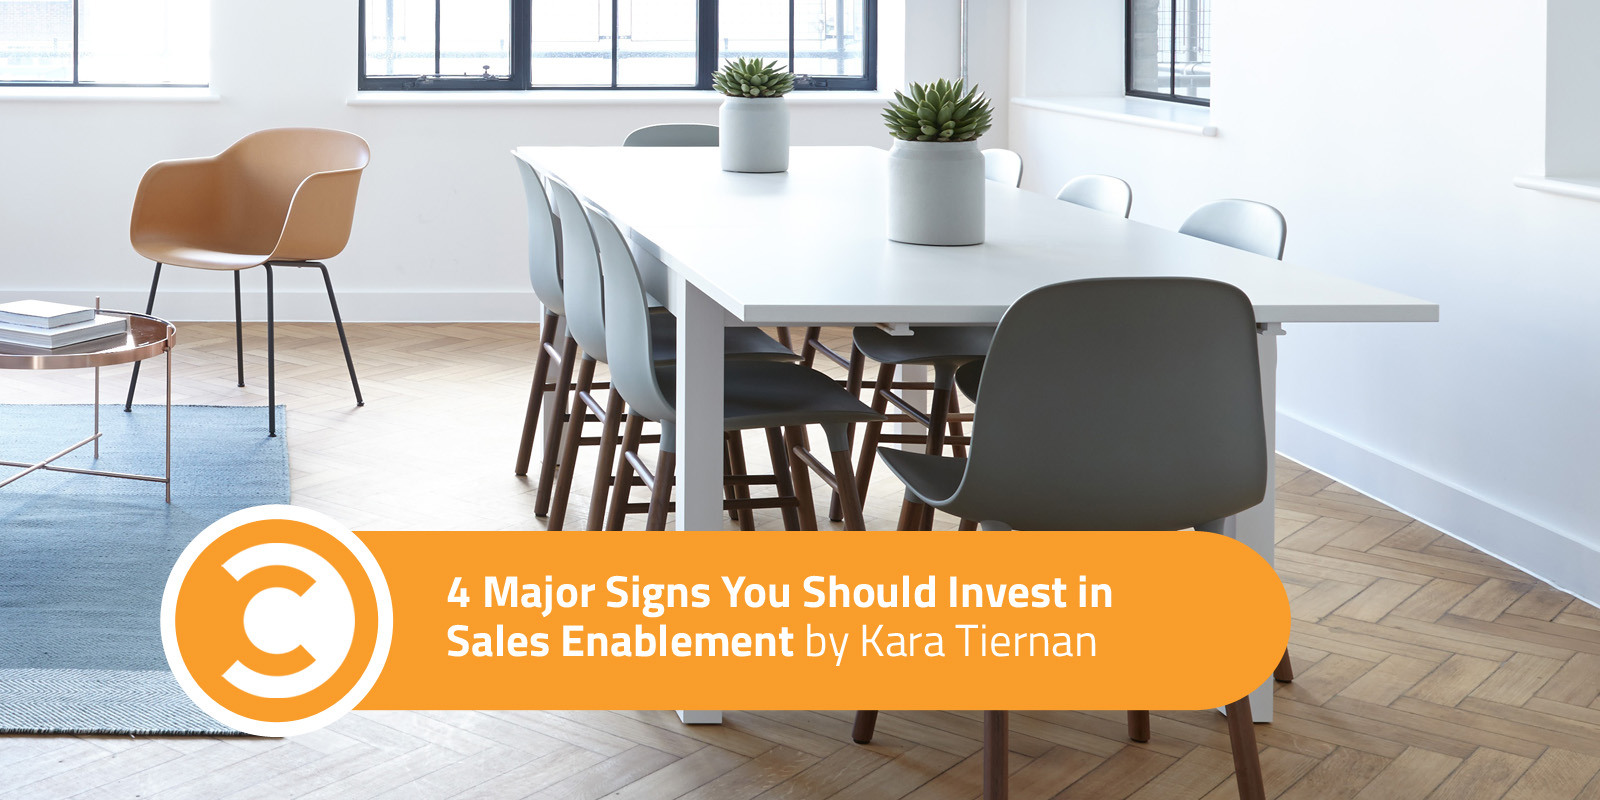 4 Major Signs You Should Invest in Sales Enablement